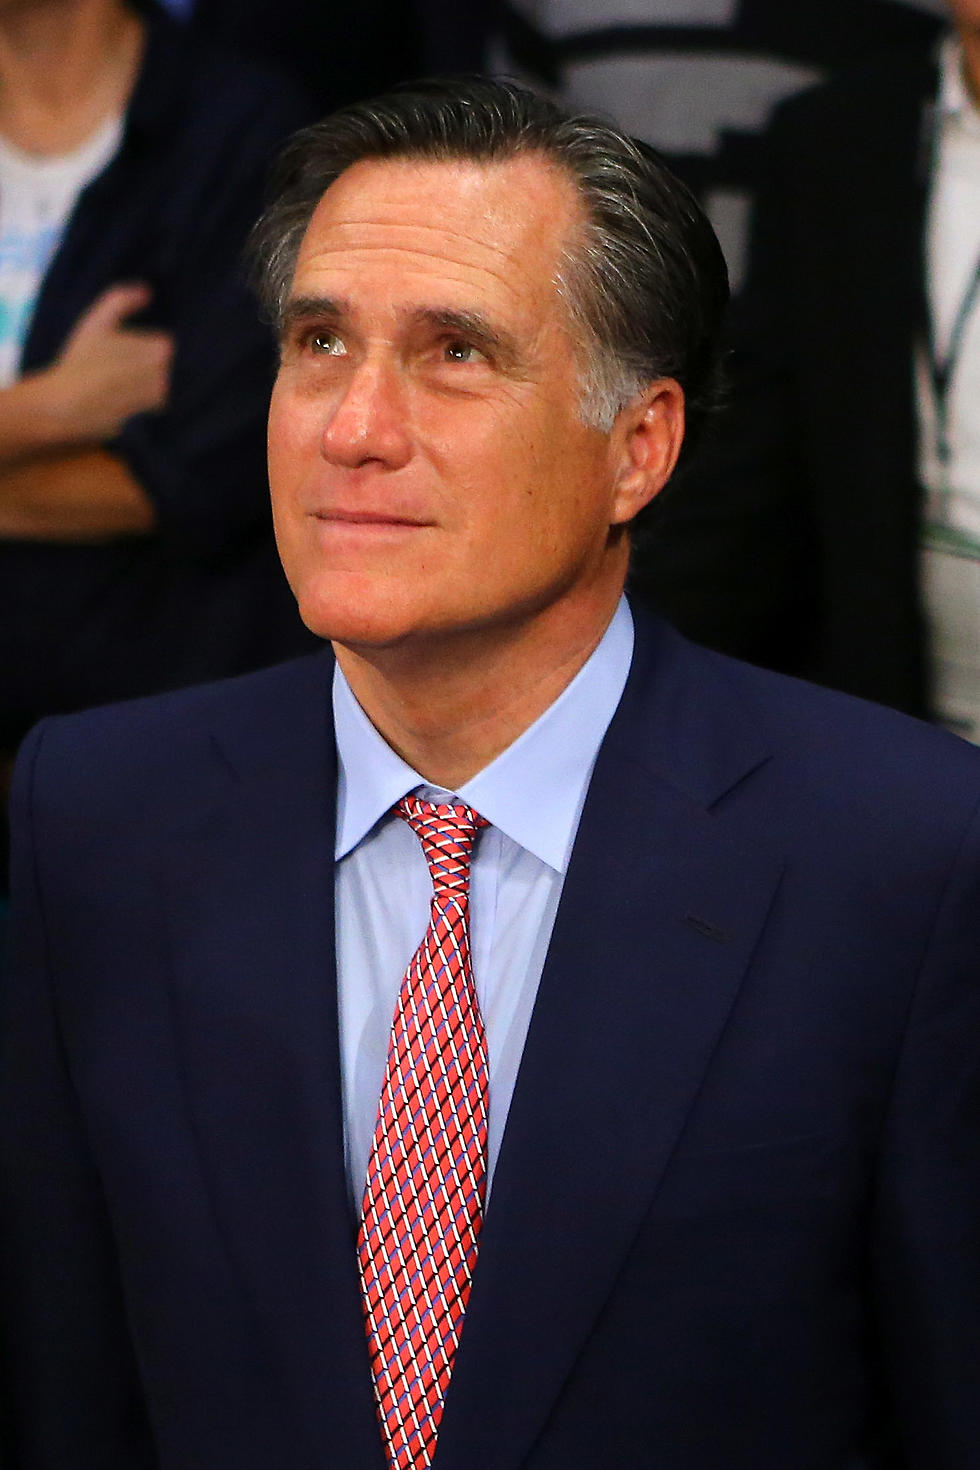 Romney Stumping for Otter and Risch